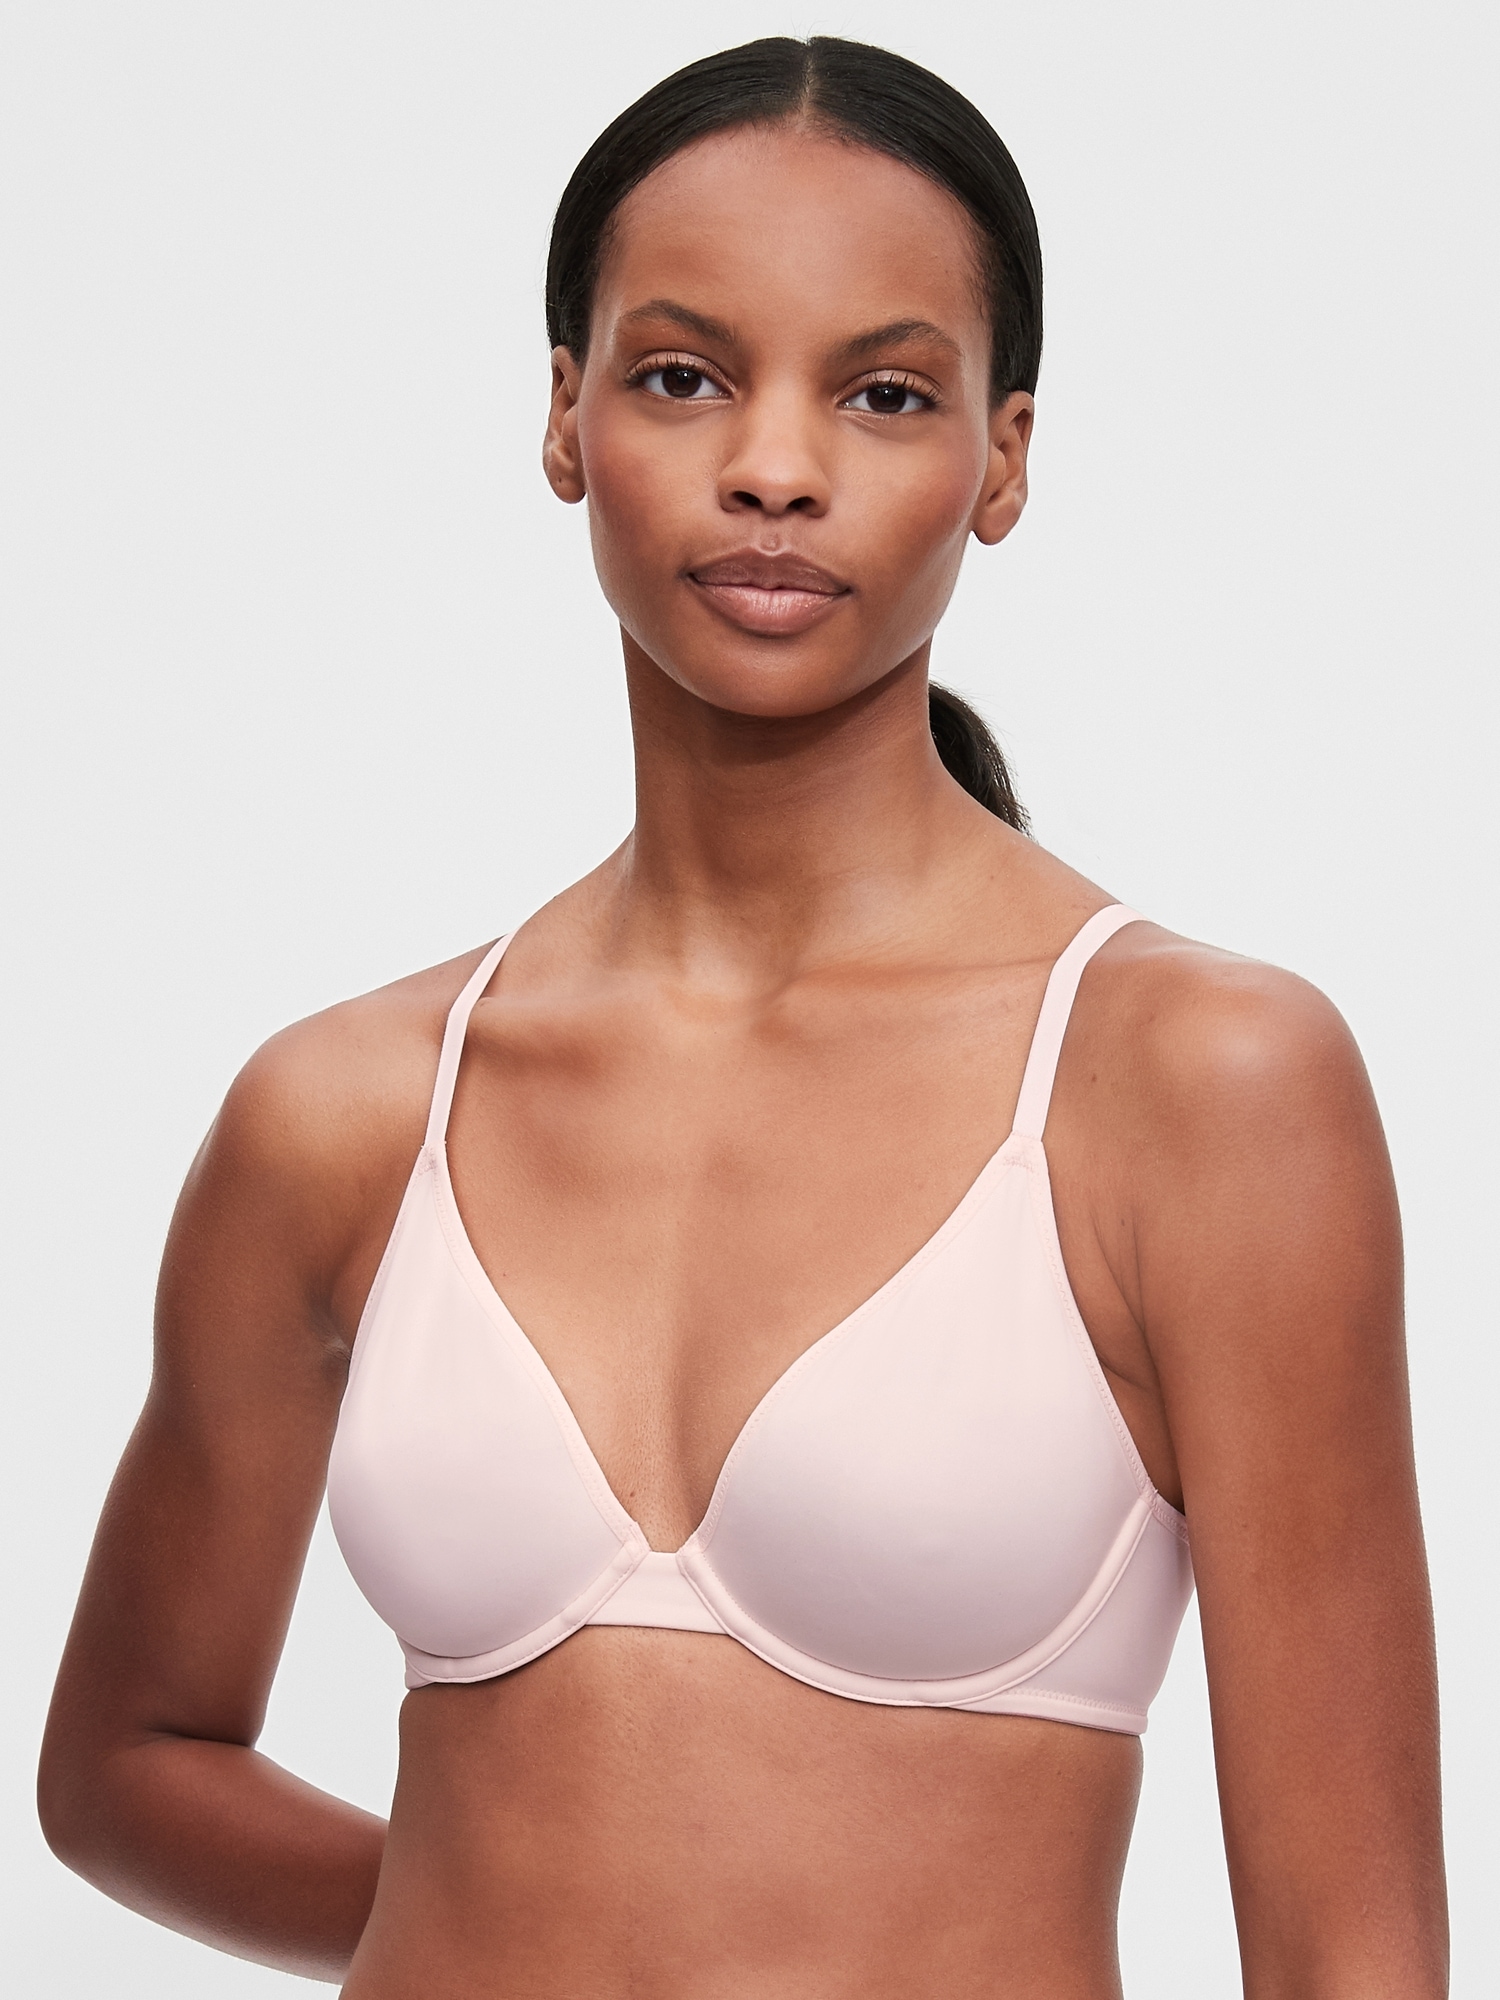 Take the Plunge: Best Low-Cut Bras for Summer